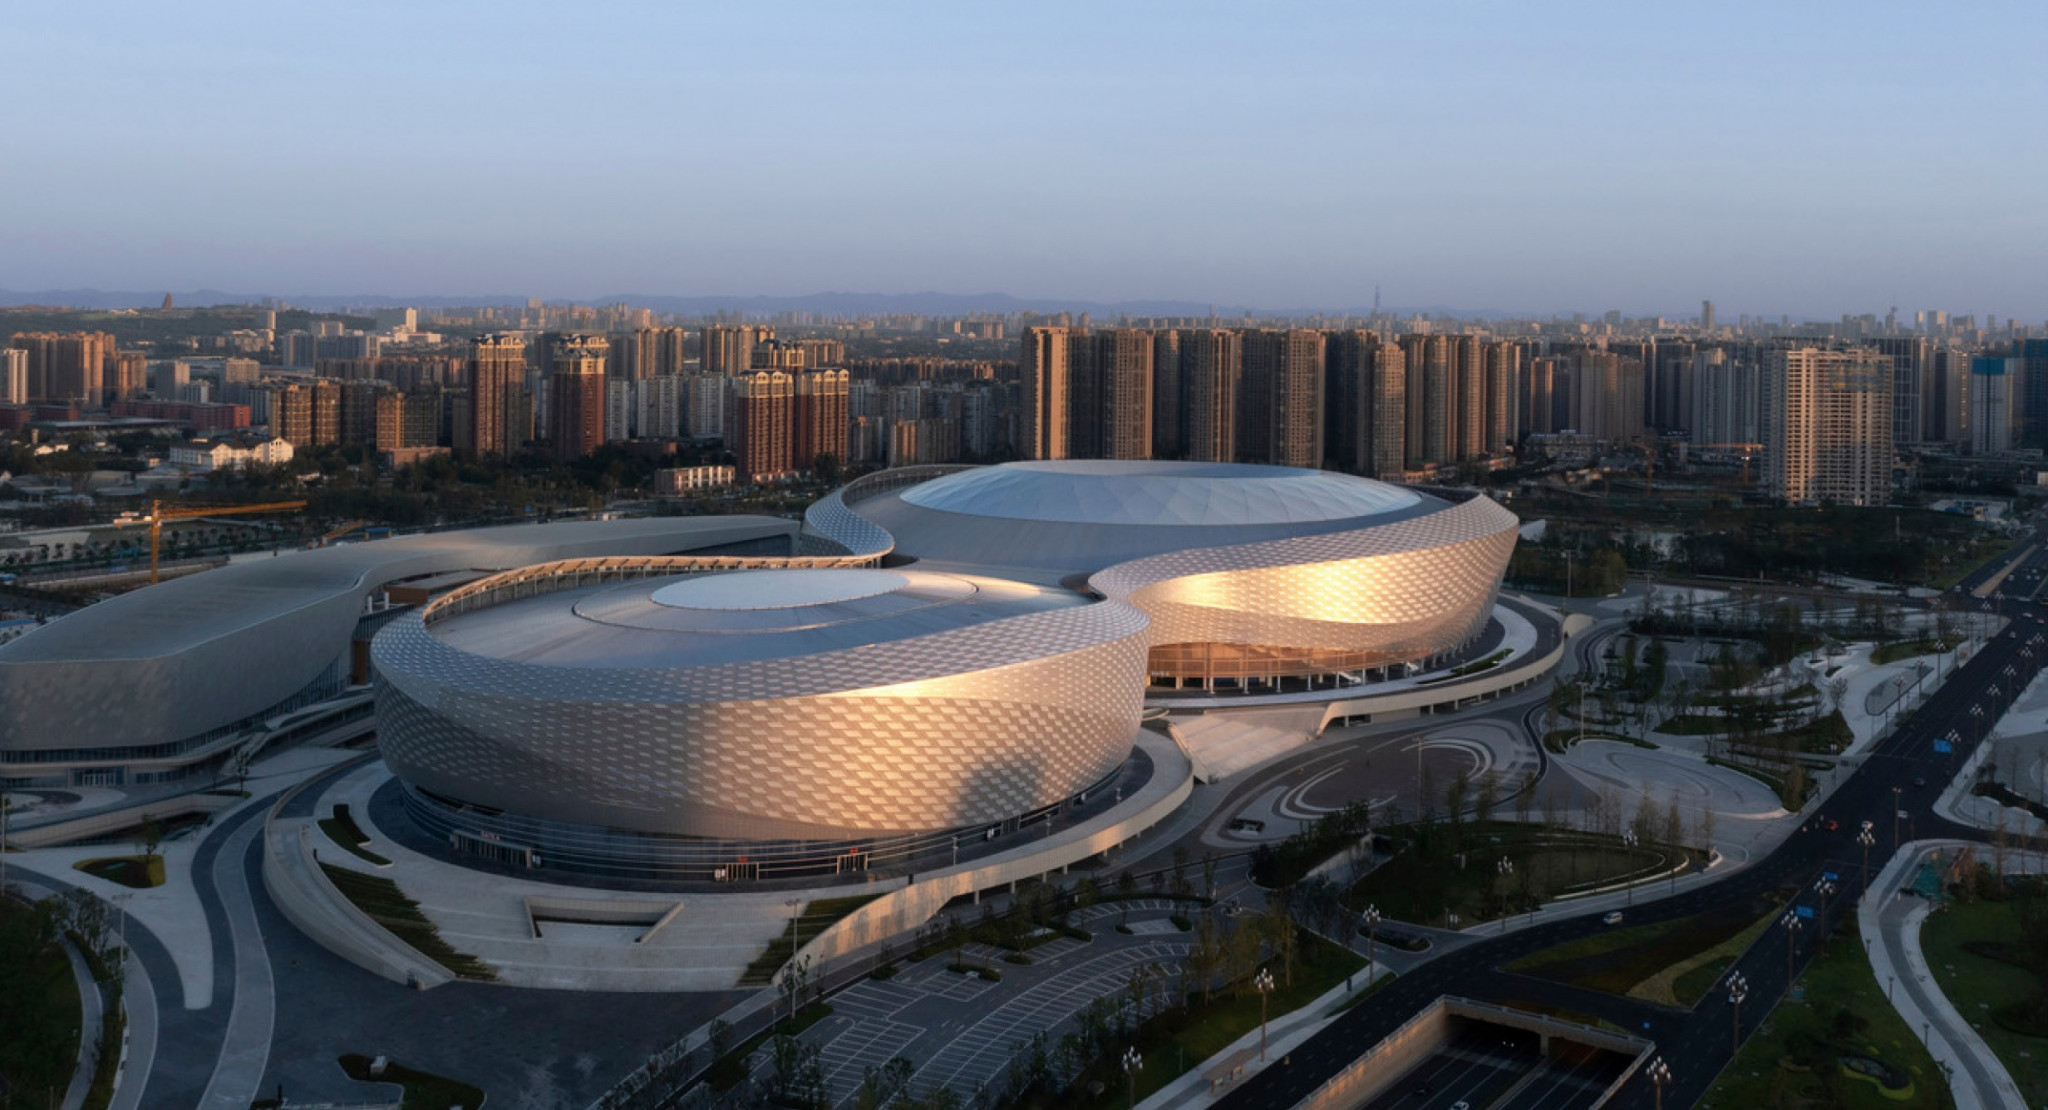 The Chengdu Phoenix Mountain Sports Park, opened in 2021, is among the venues that have been constructed before the FISU Summer World University Games ©HKS Architects